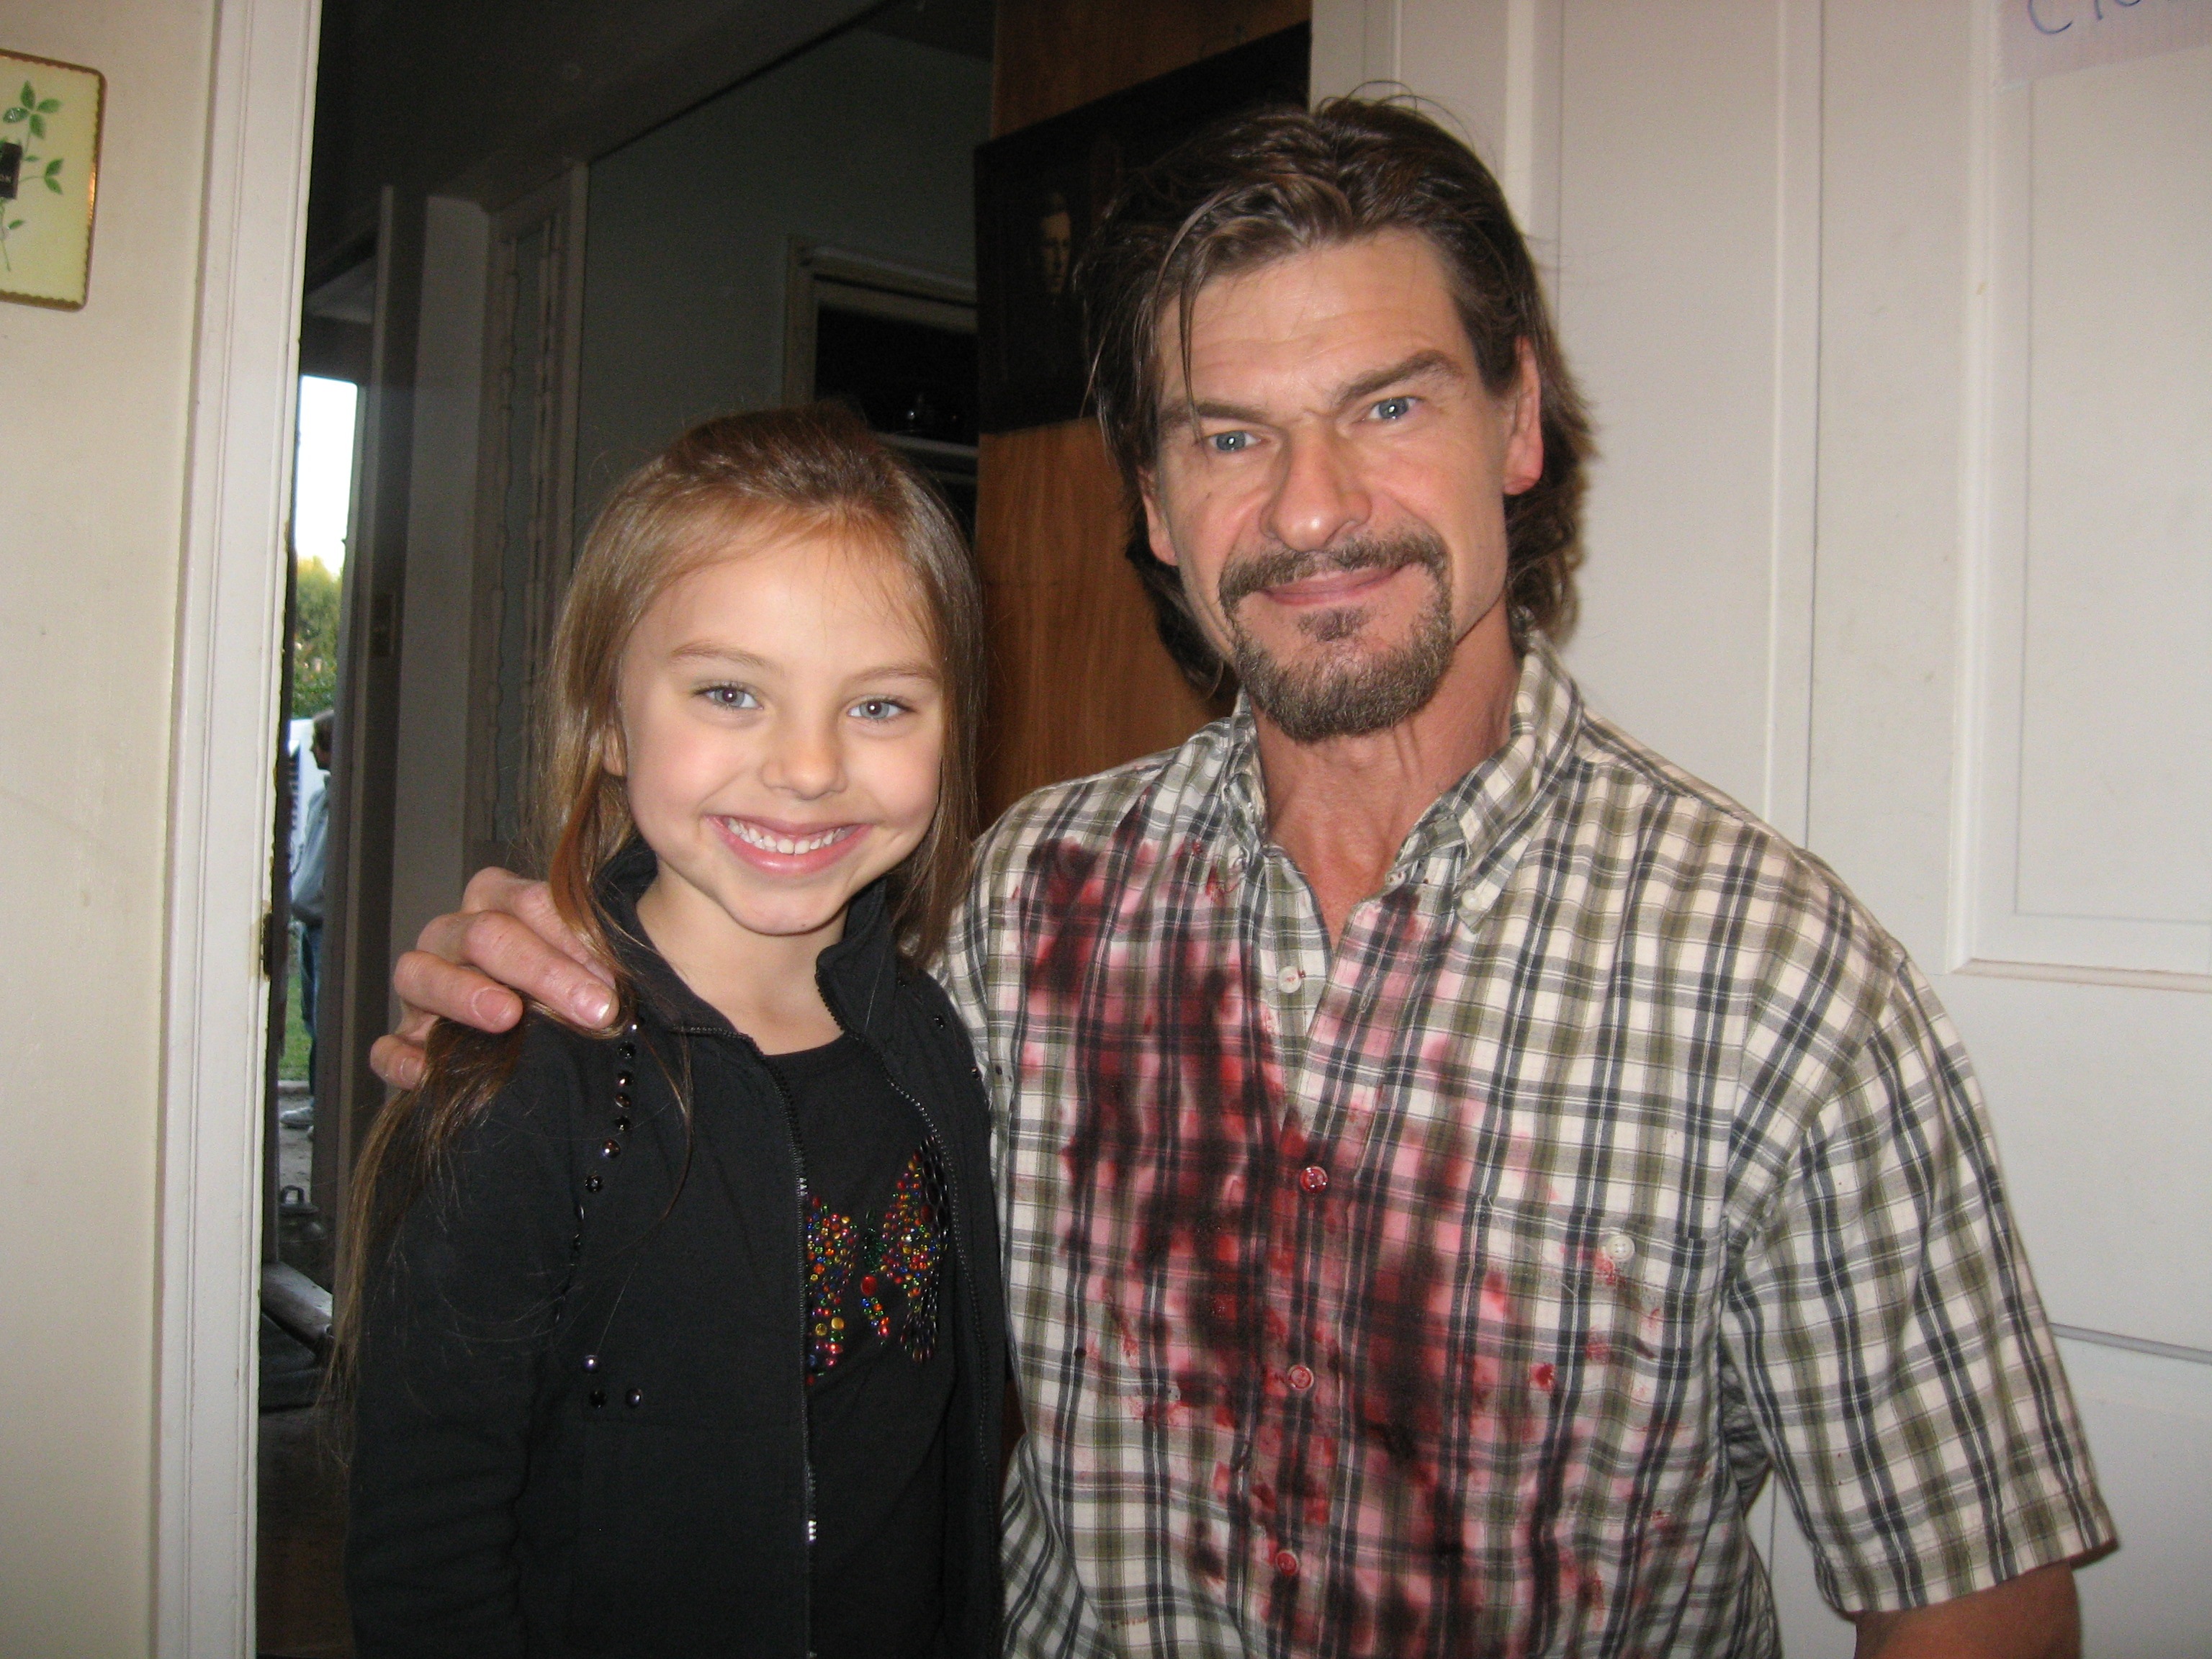 Caitlin Carmichael and Don Swayze on set of feature film 